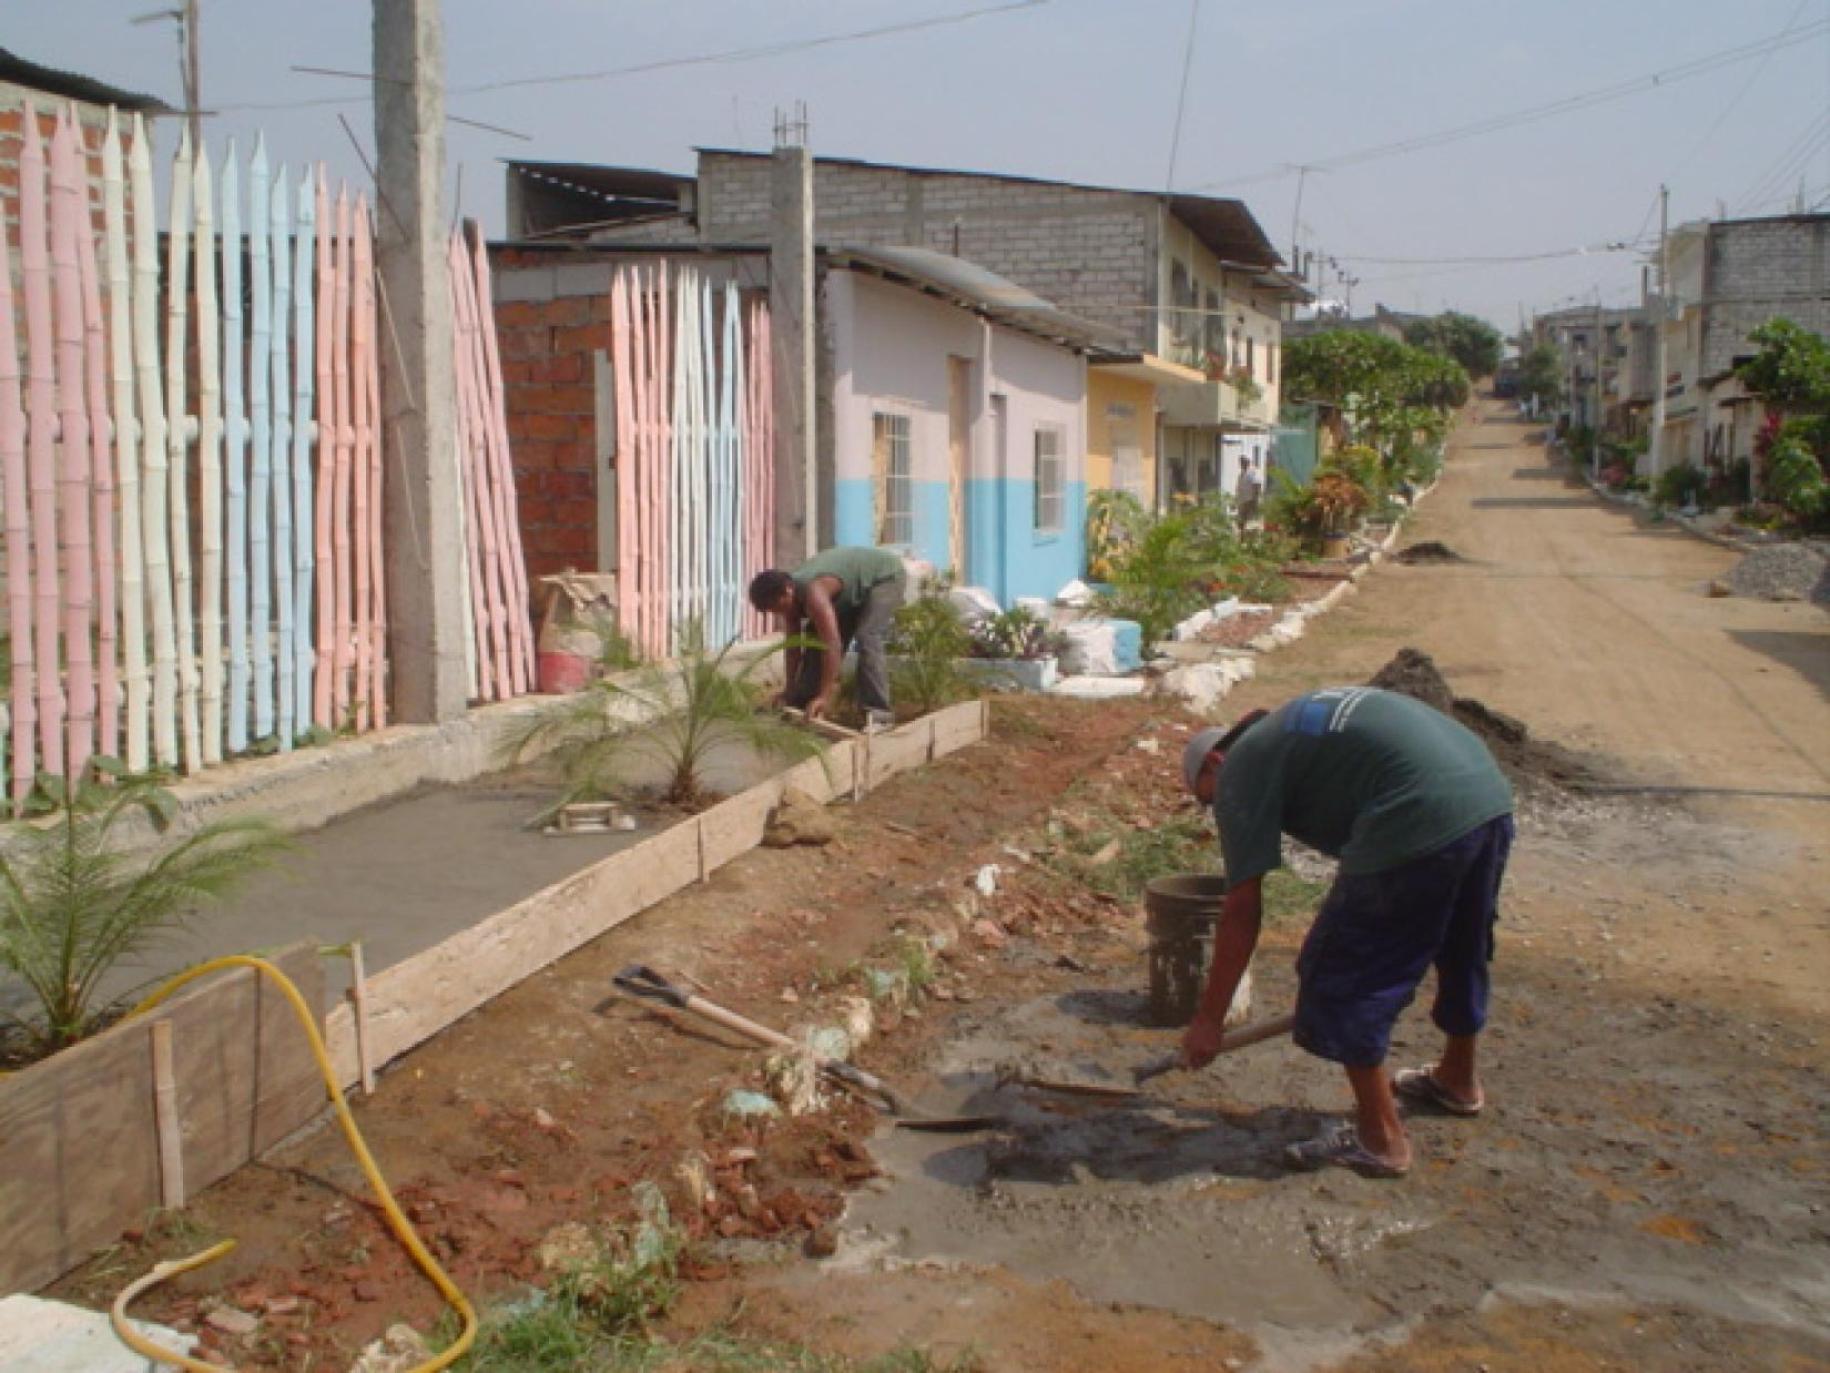 People plant plants outside colorful small buildings and a dirt road.